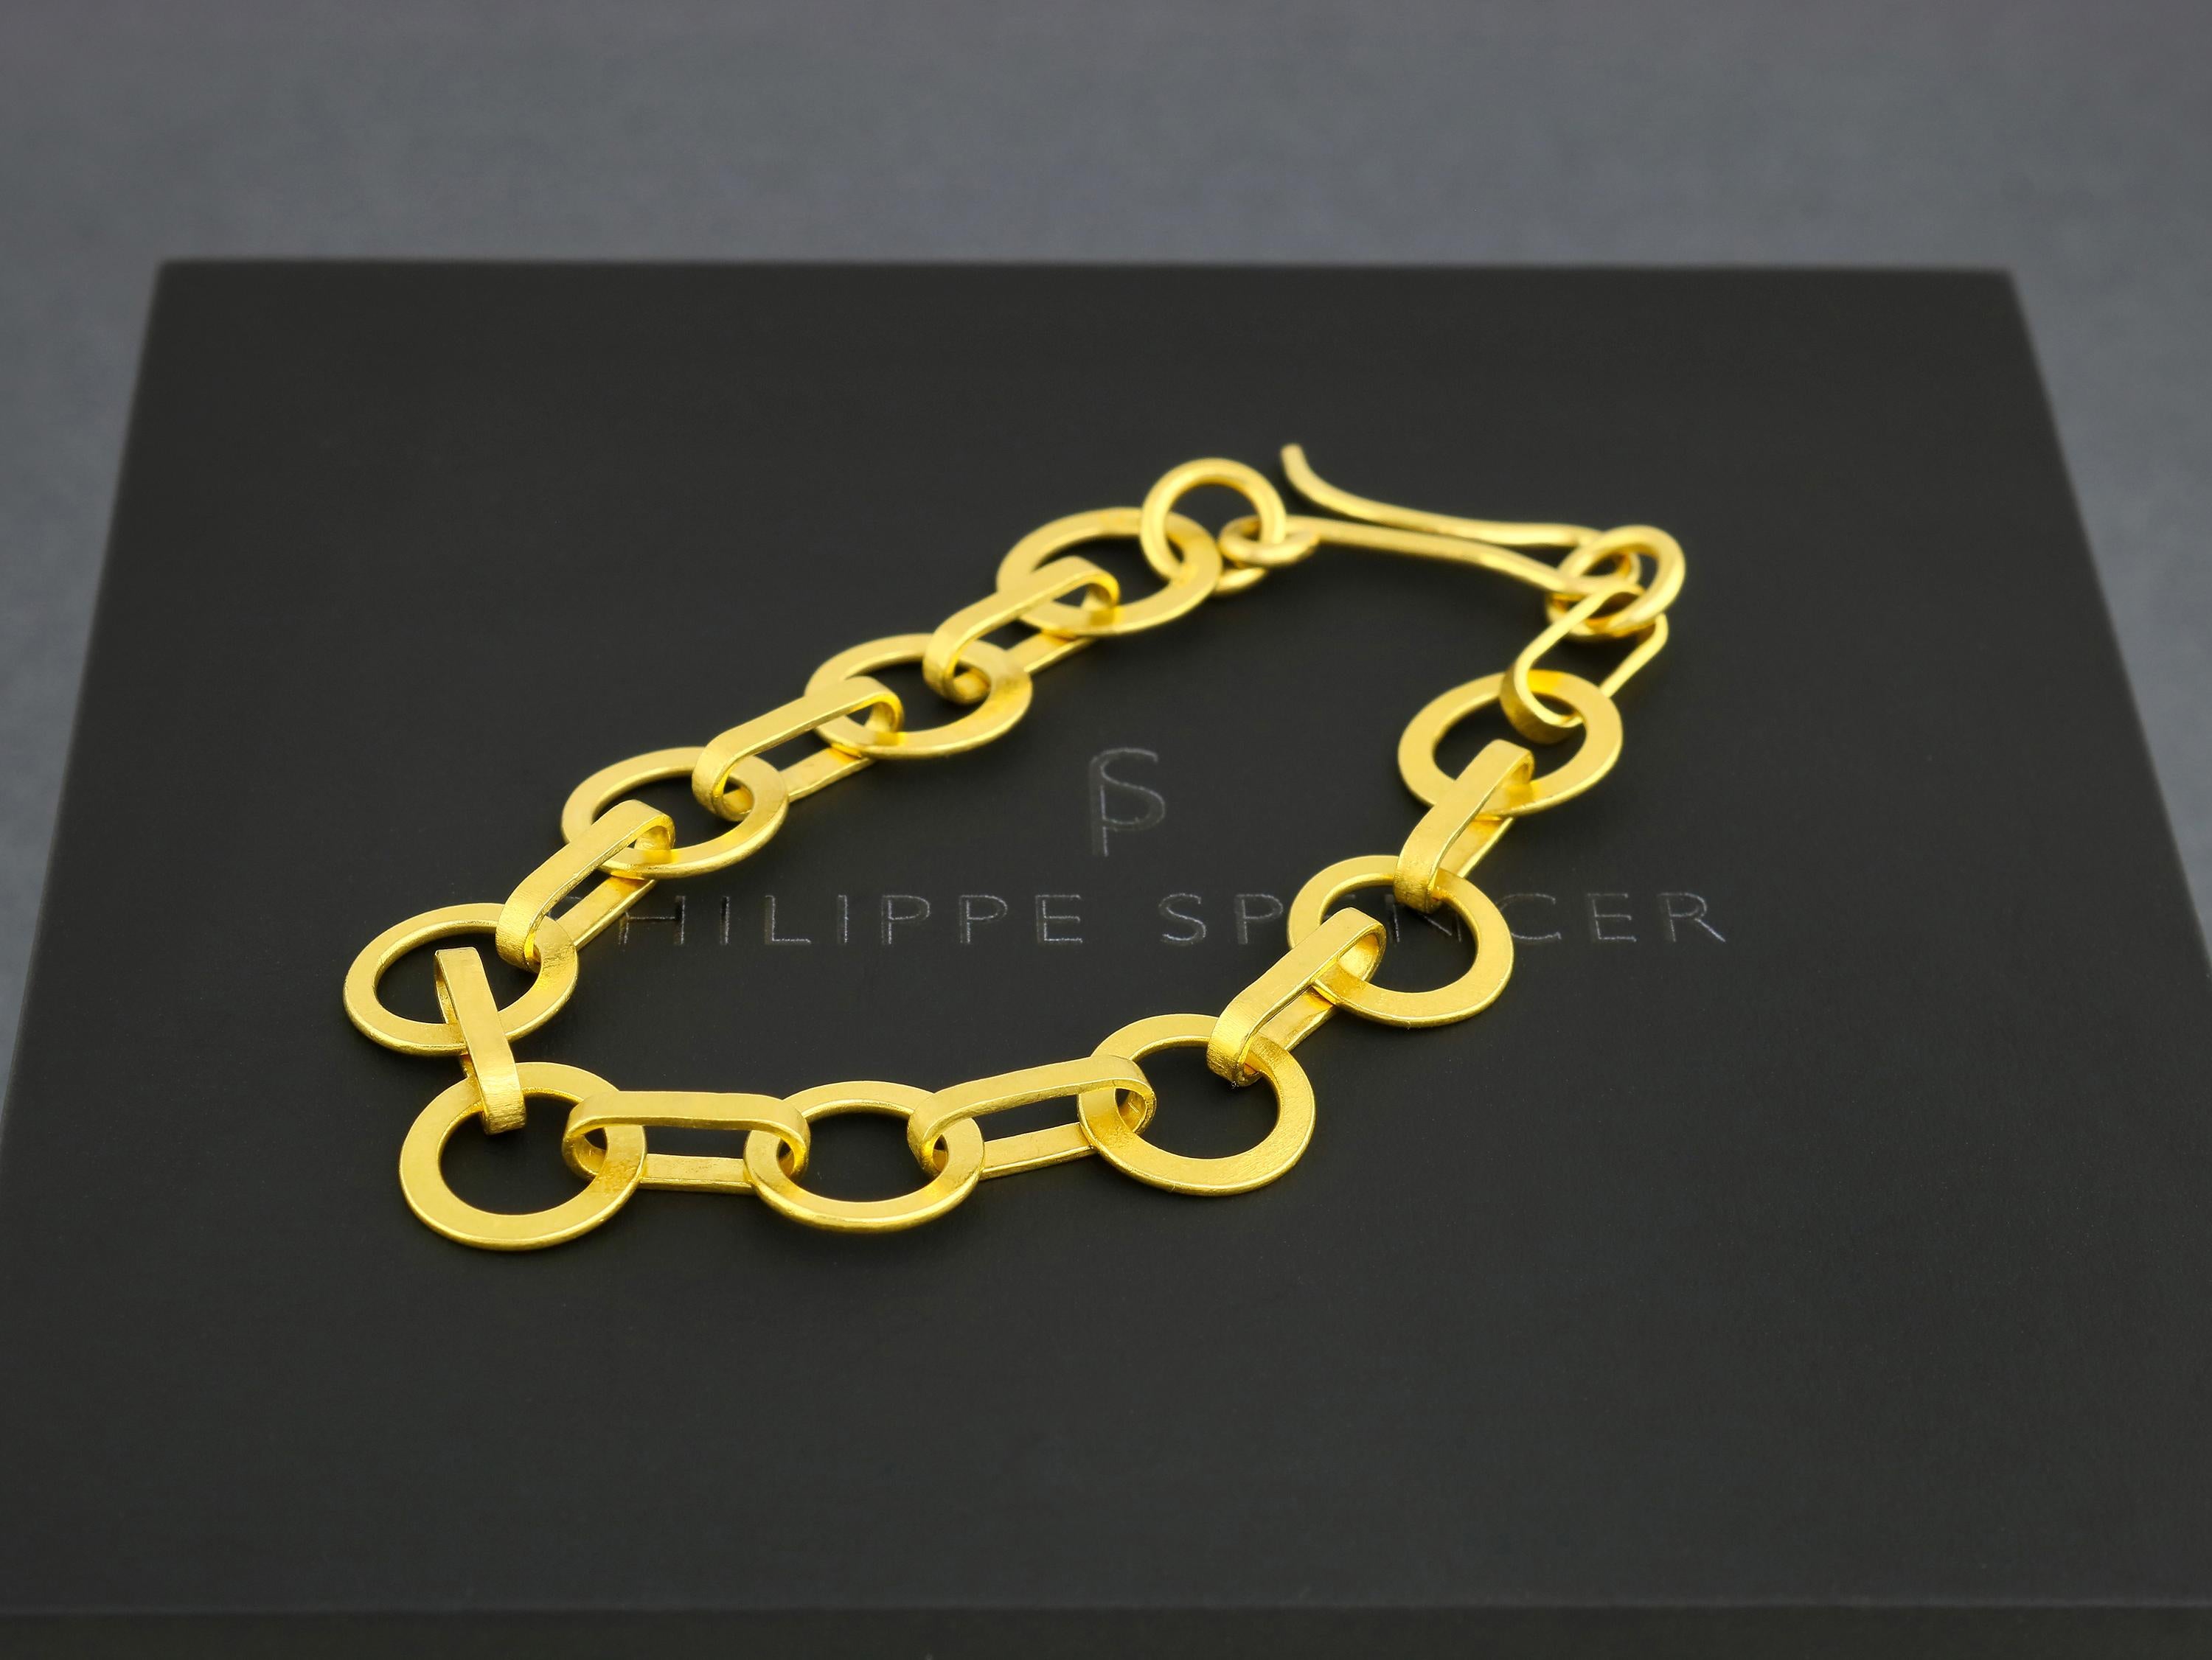 PHILIPPE SPENCER - Solid 22K Gold Round Link Bracelet. Each link & component unique and authentically smithed on a vintage anvil. Era concealing heavy matte finish.

This in-stock item is size 7.5